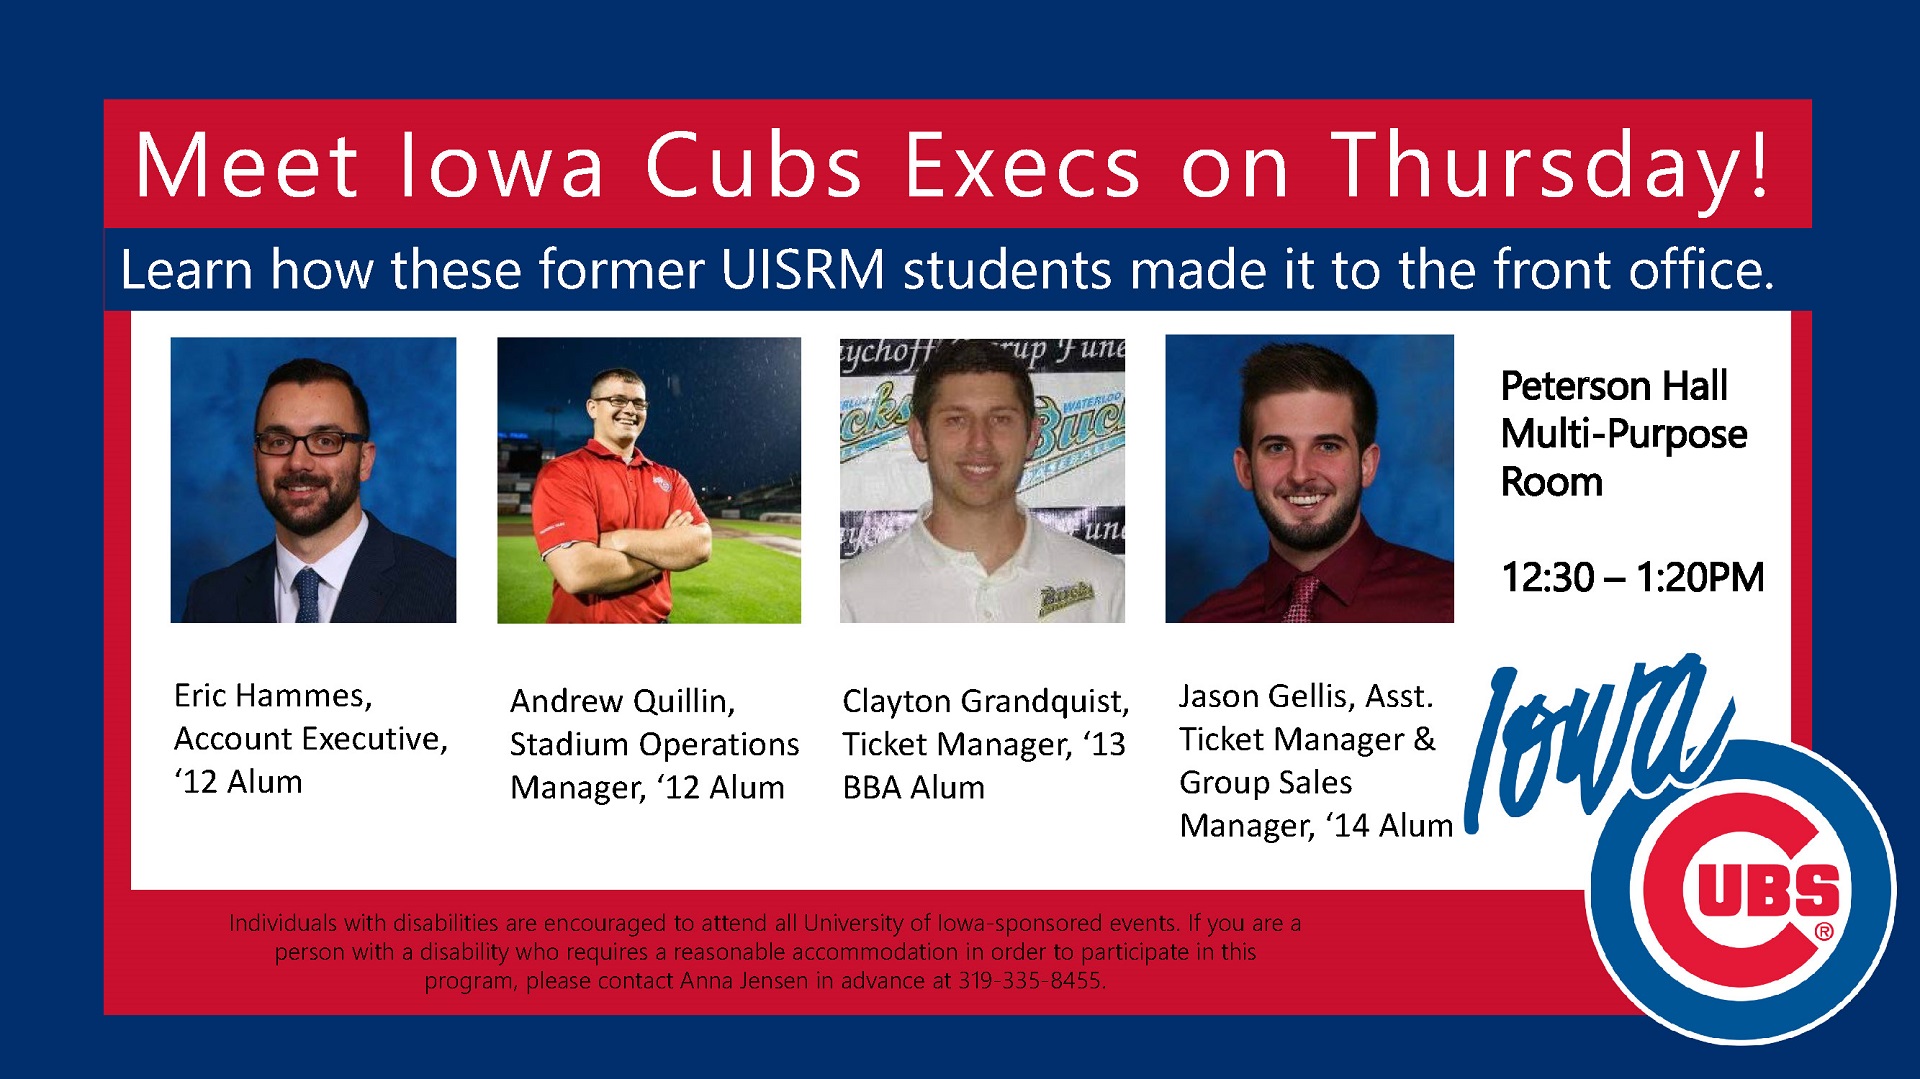 Iowa Cubs Executives on campus 11/2/17 @ 12:30 in Peterson Hall Multipurpose Room